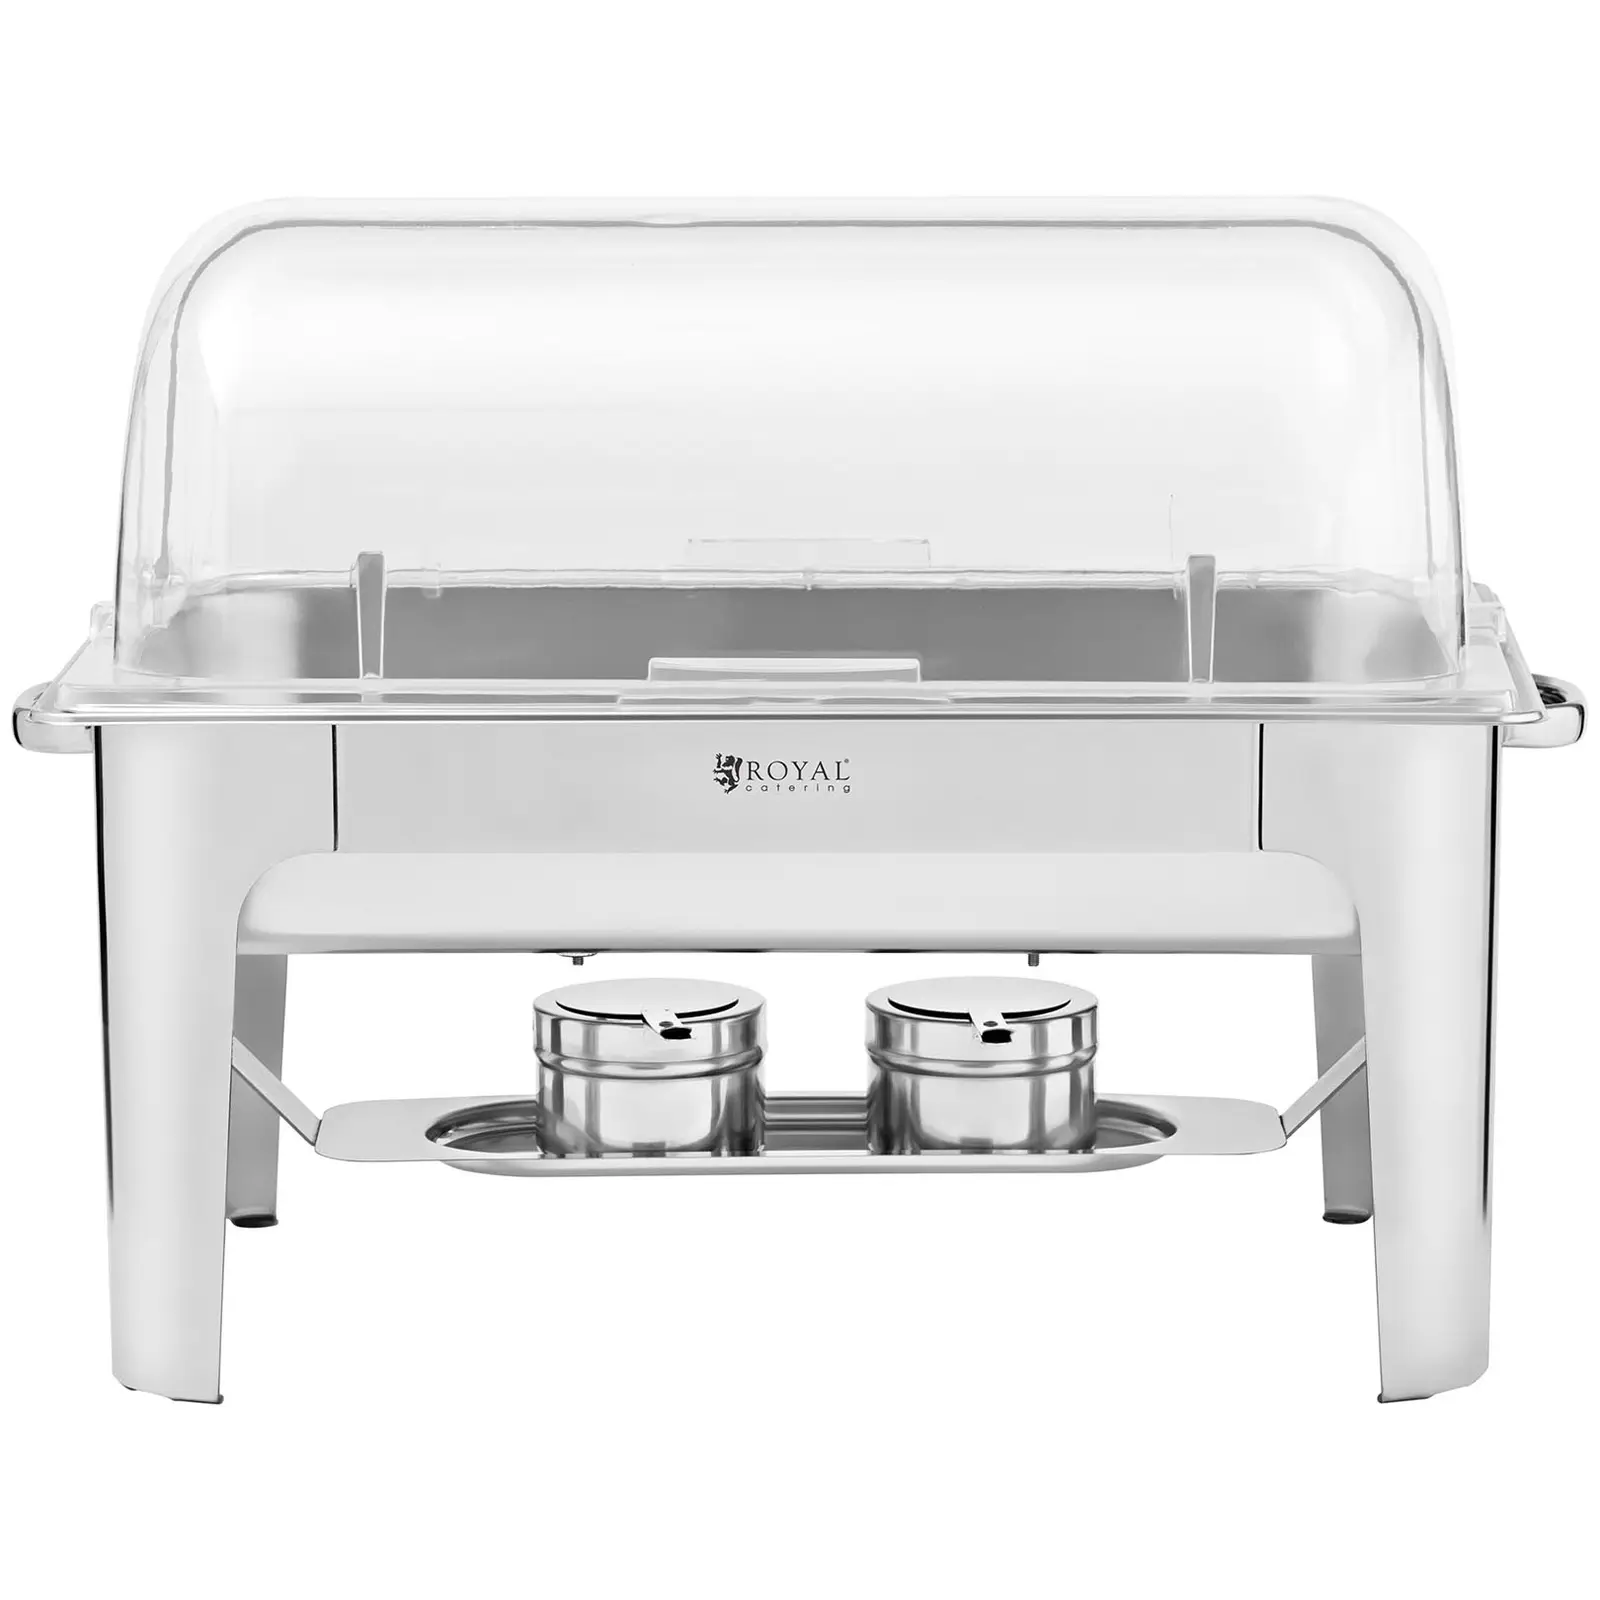 Chafing Dish - 1/1 GN - Royal Catering - 8.5 L - bredt stativ